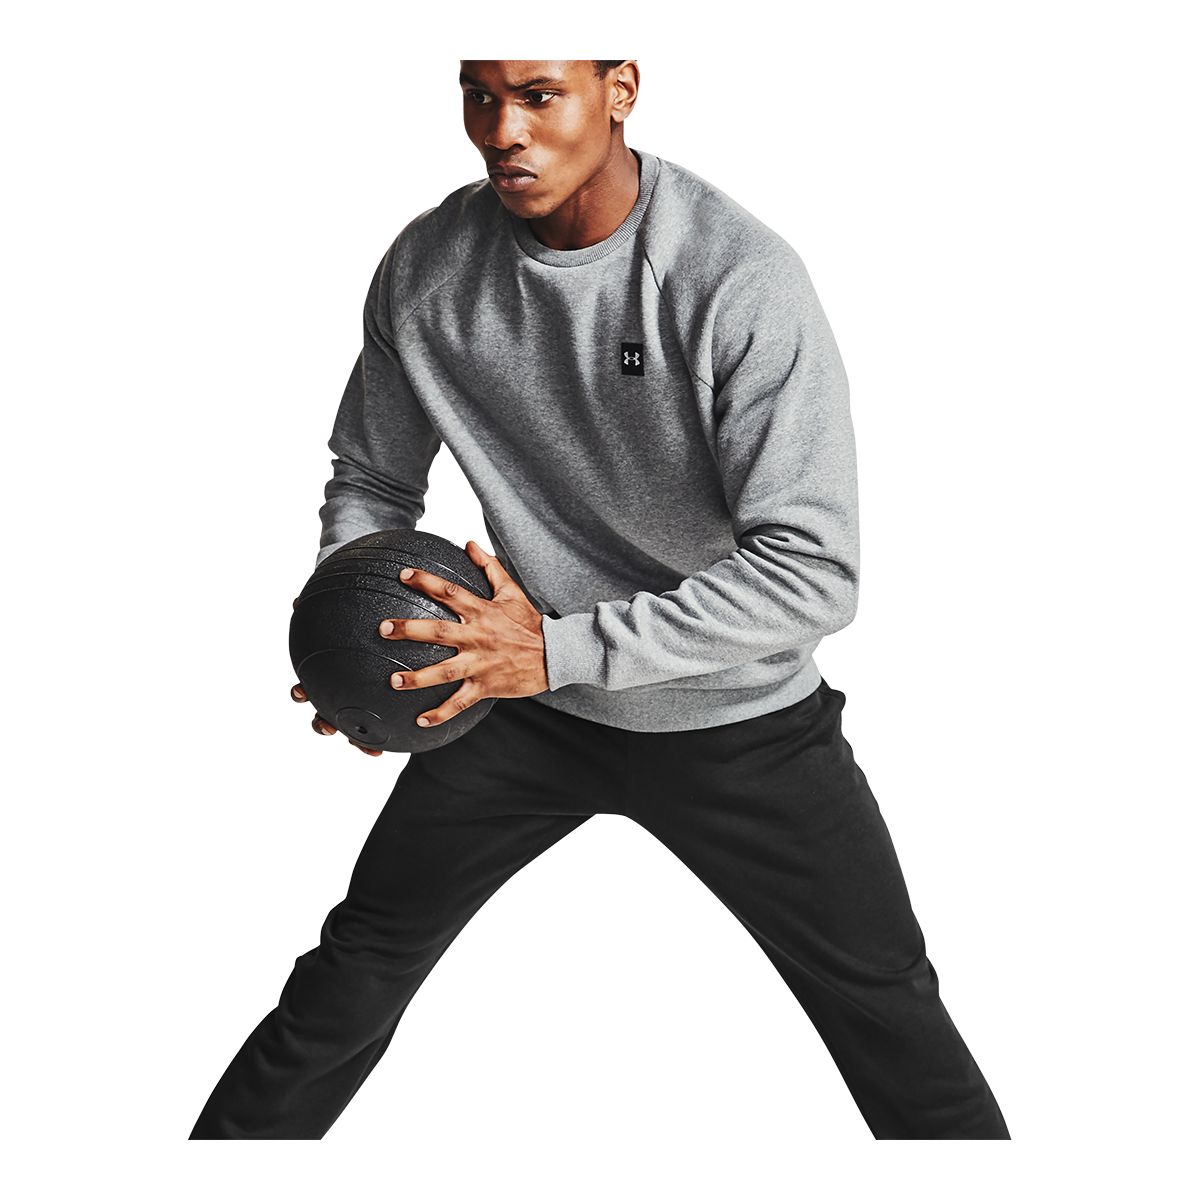 Under Armour Training Rival fleece sweatpants in gray